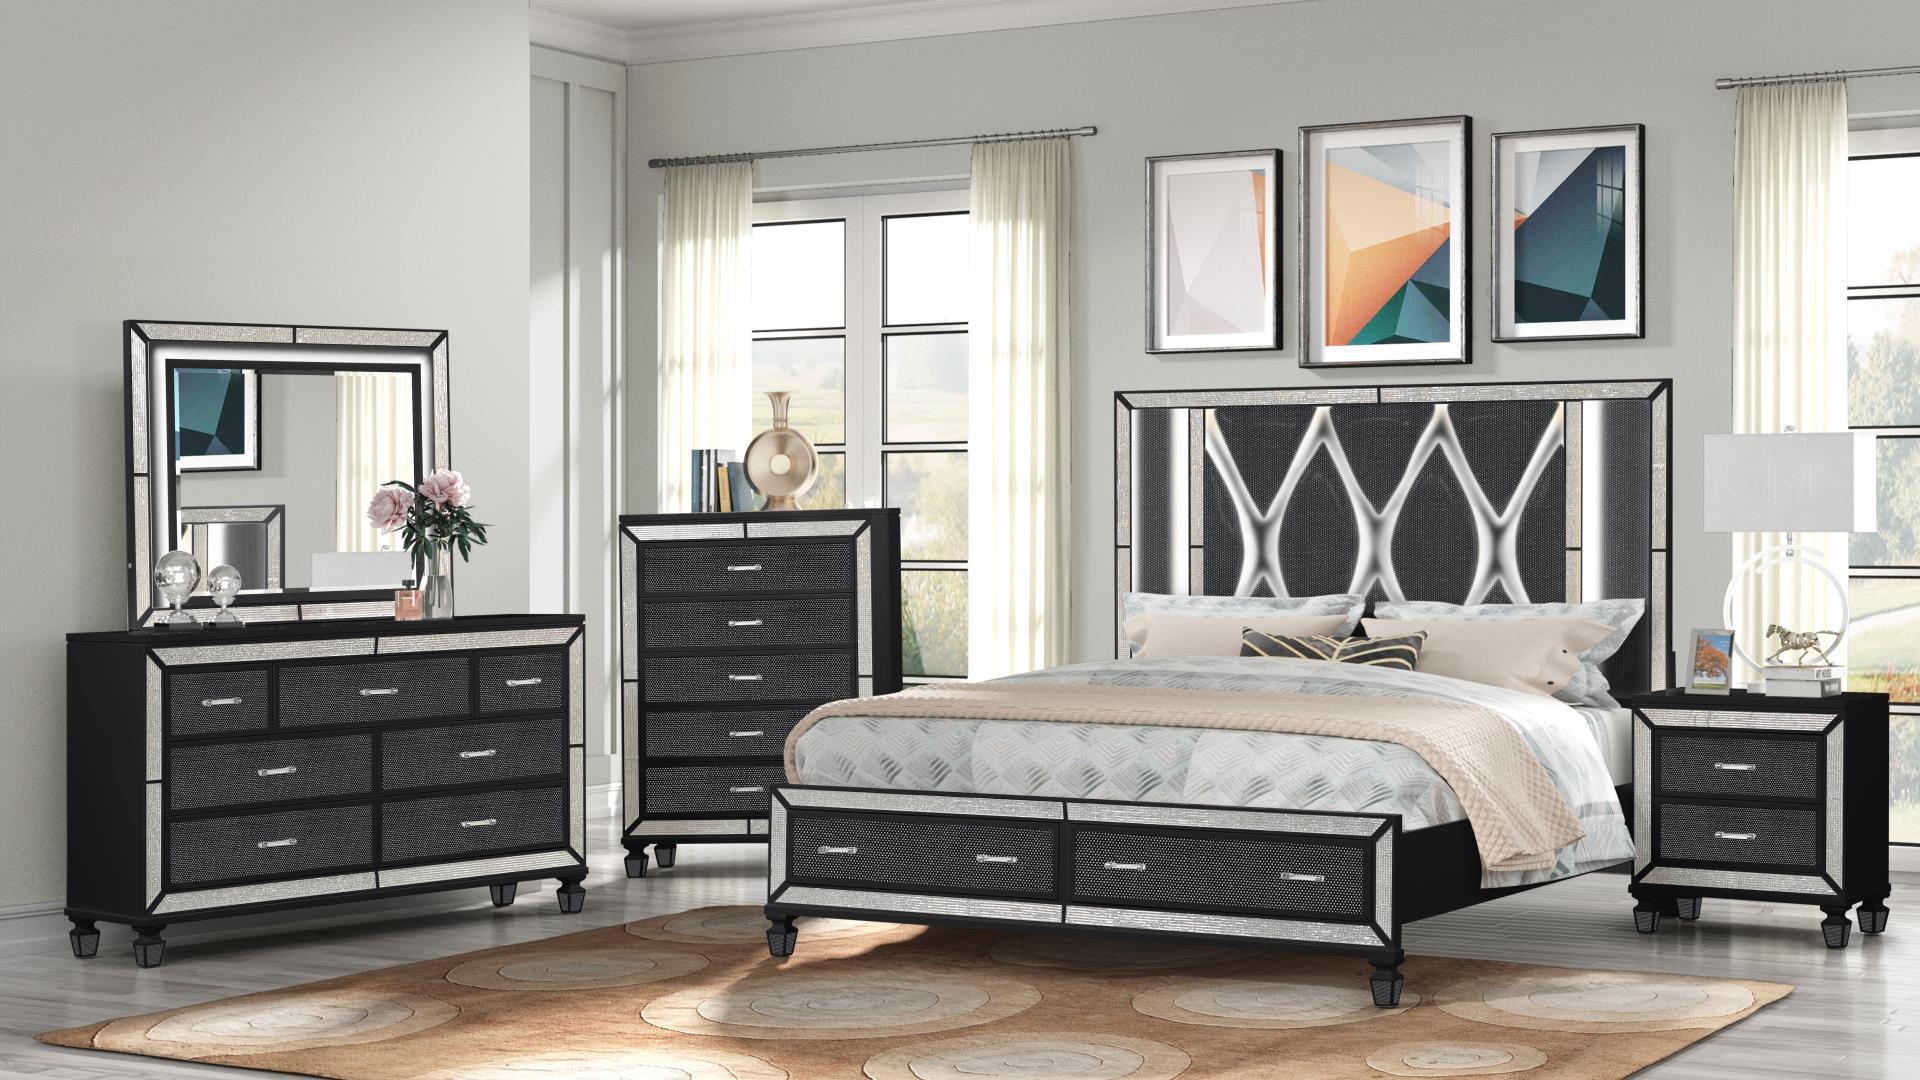 

    
Glam Black Solid Wood Storage King Bed CRYSTAL Galaxy Home Modern Contemporary
